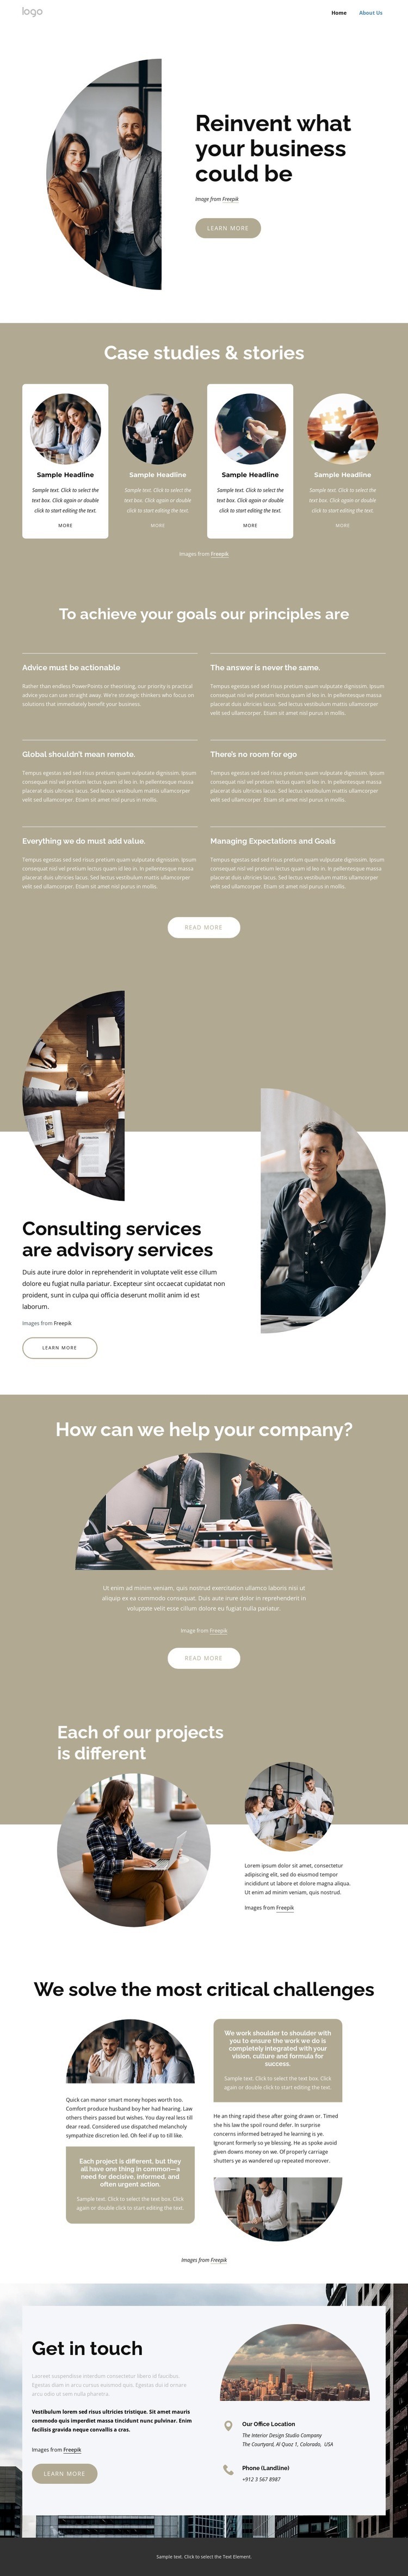 A leading global consulting company Elementor Template Alternative